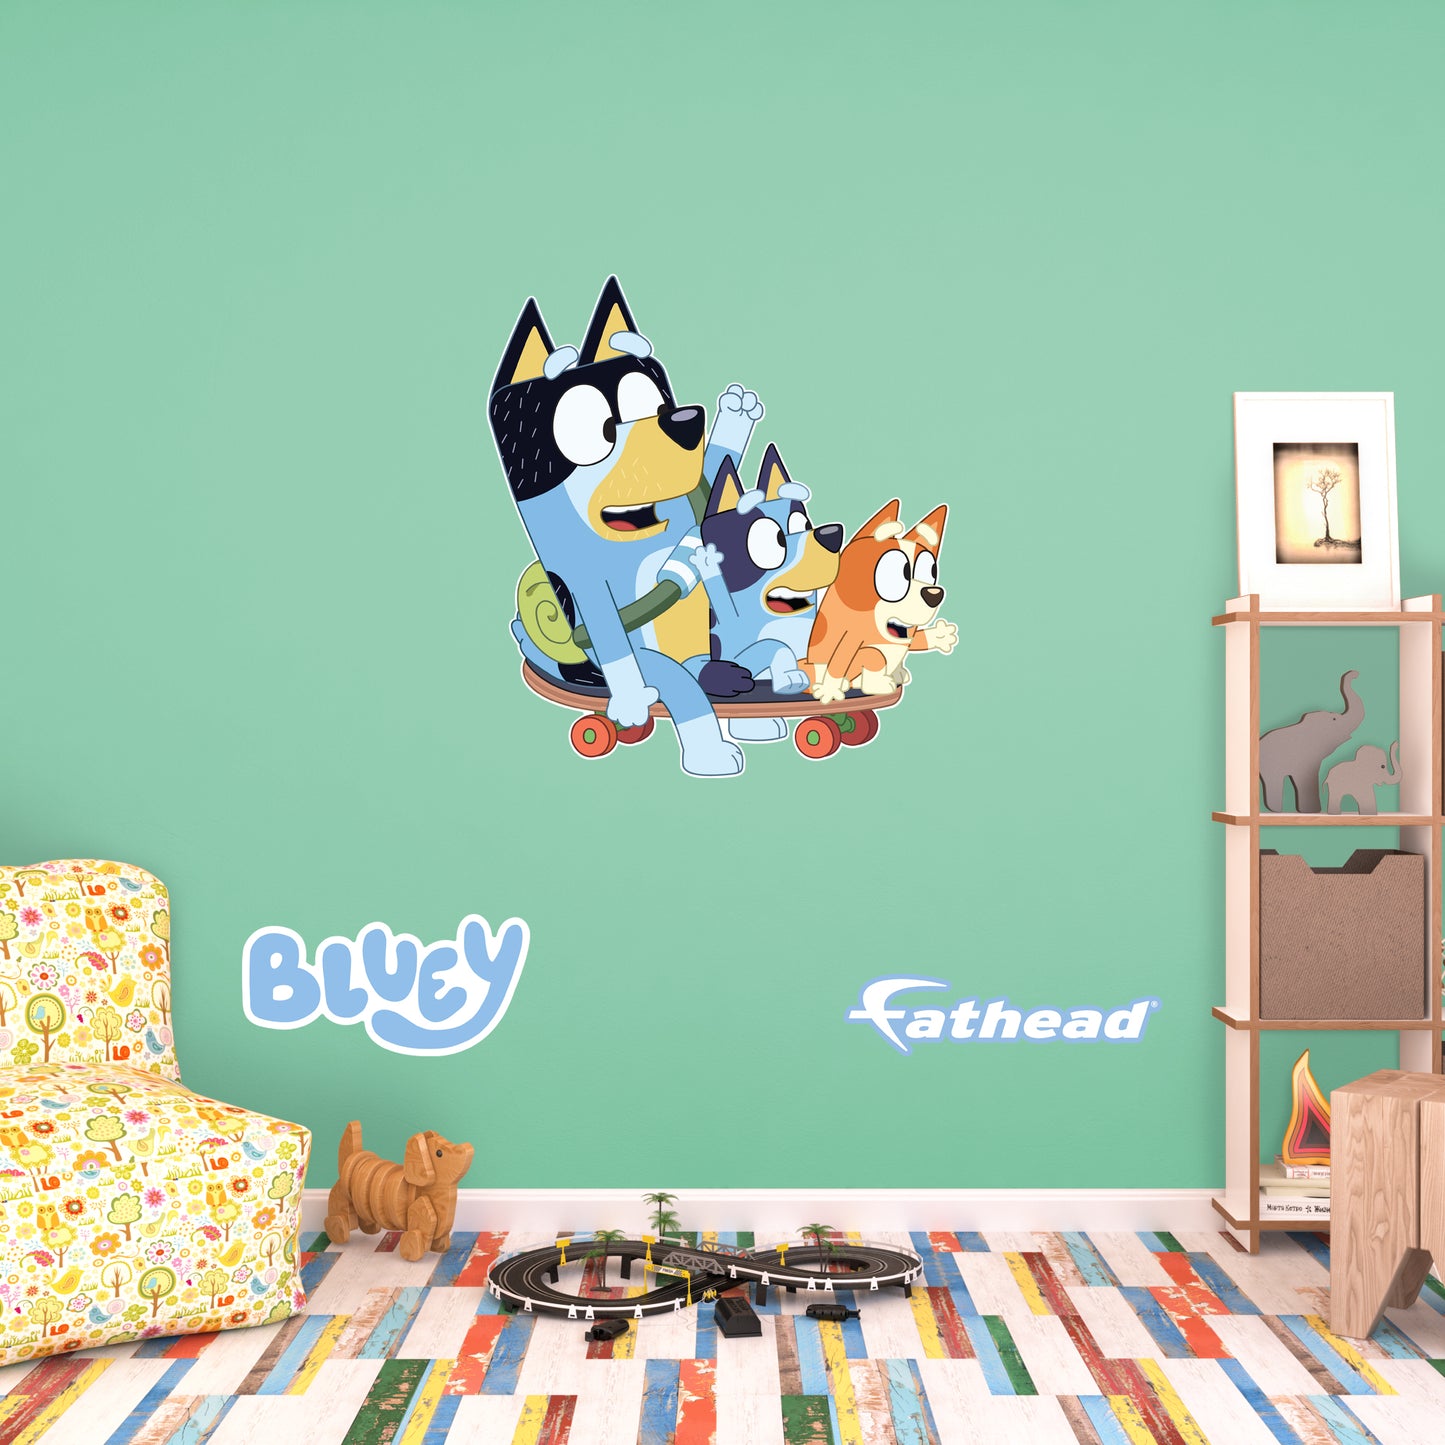 Bluey: Bandit, Bluey, Bingo Skateboard Icon        - Officially Licensed BBC Removable     Adhesive Decal